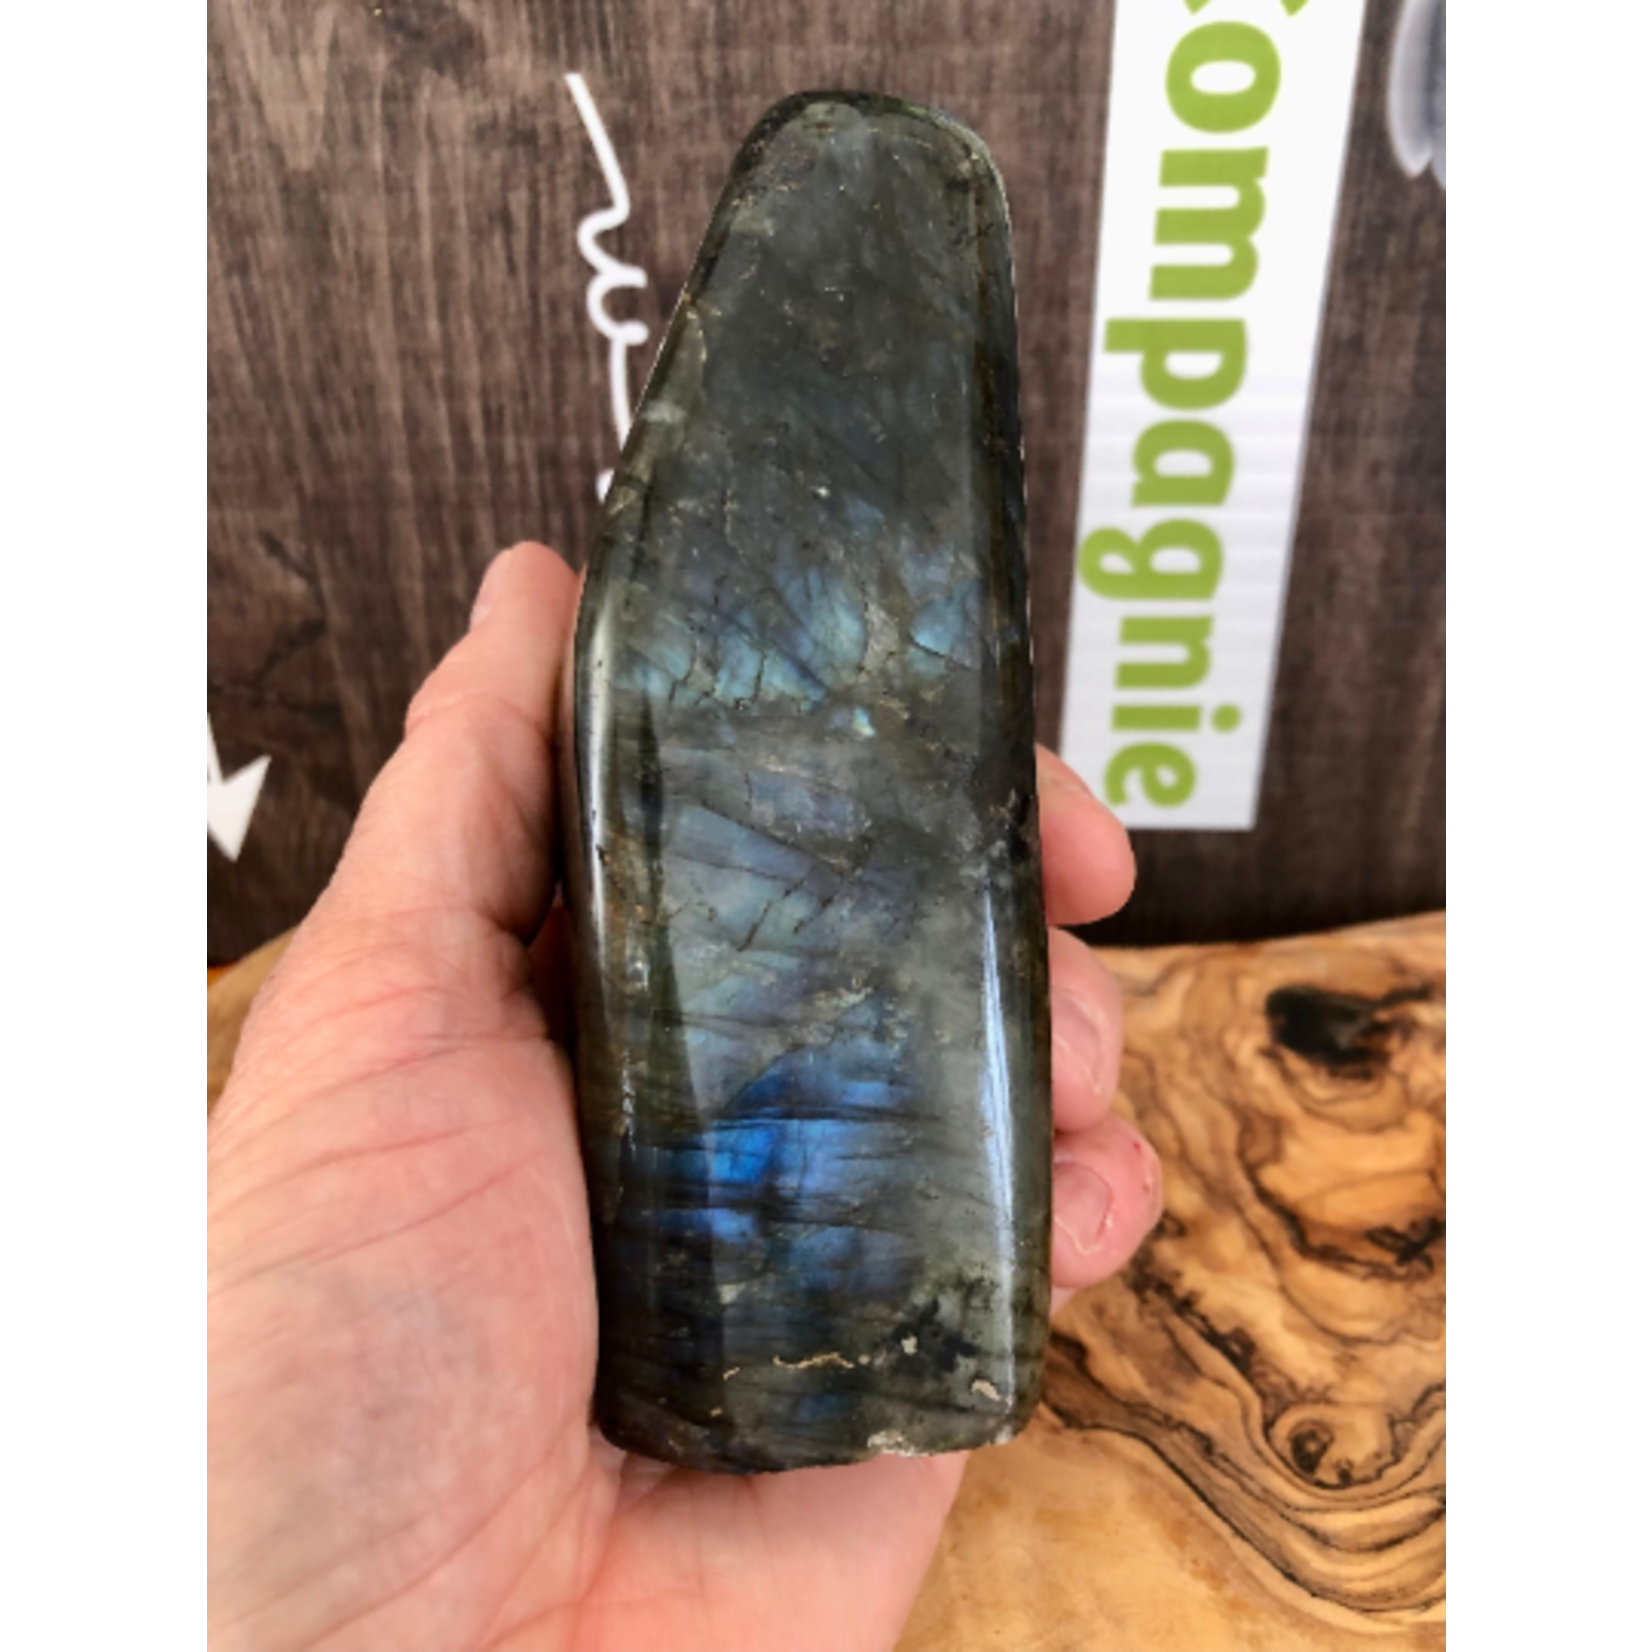 long labradorite free form, banishes fears and insecurities, and strengthens faith in oneself and trust in the universe